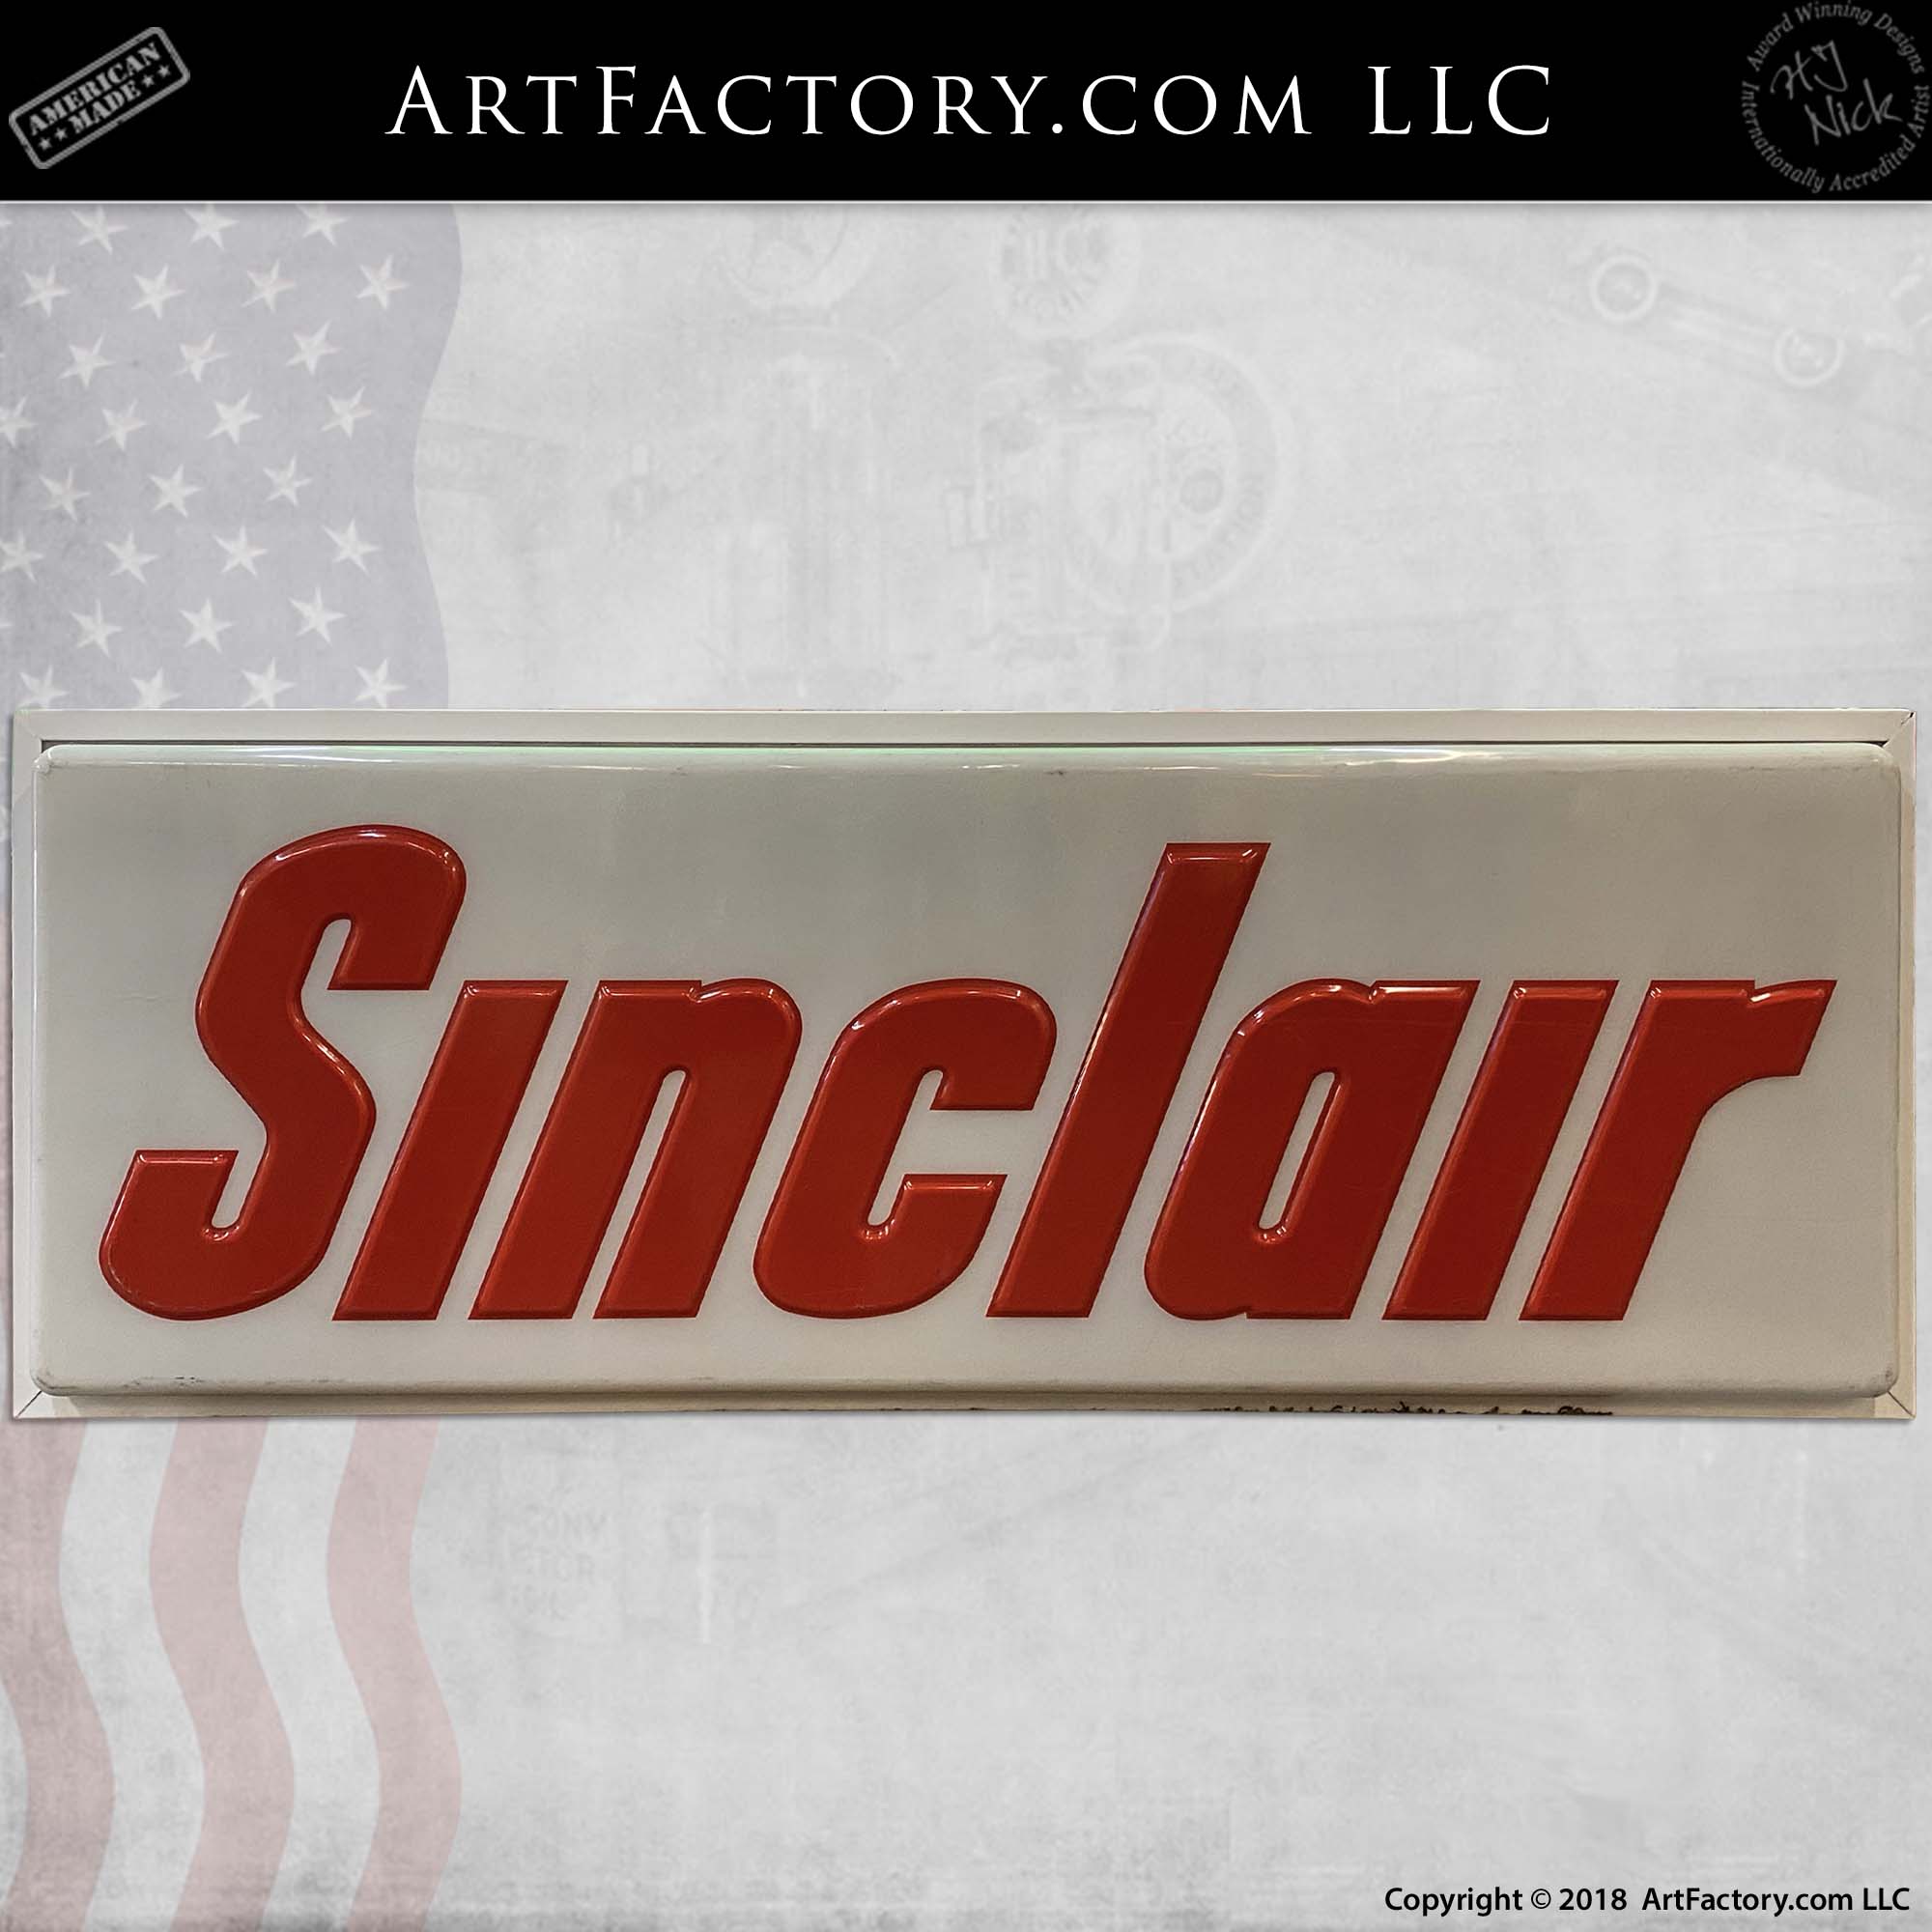 Vintage Sinclair Lighted Sign